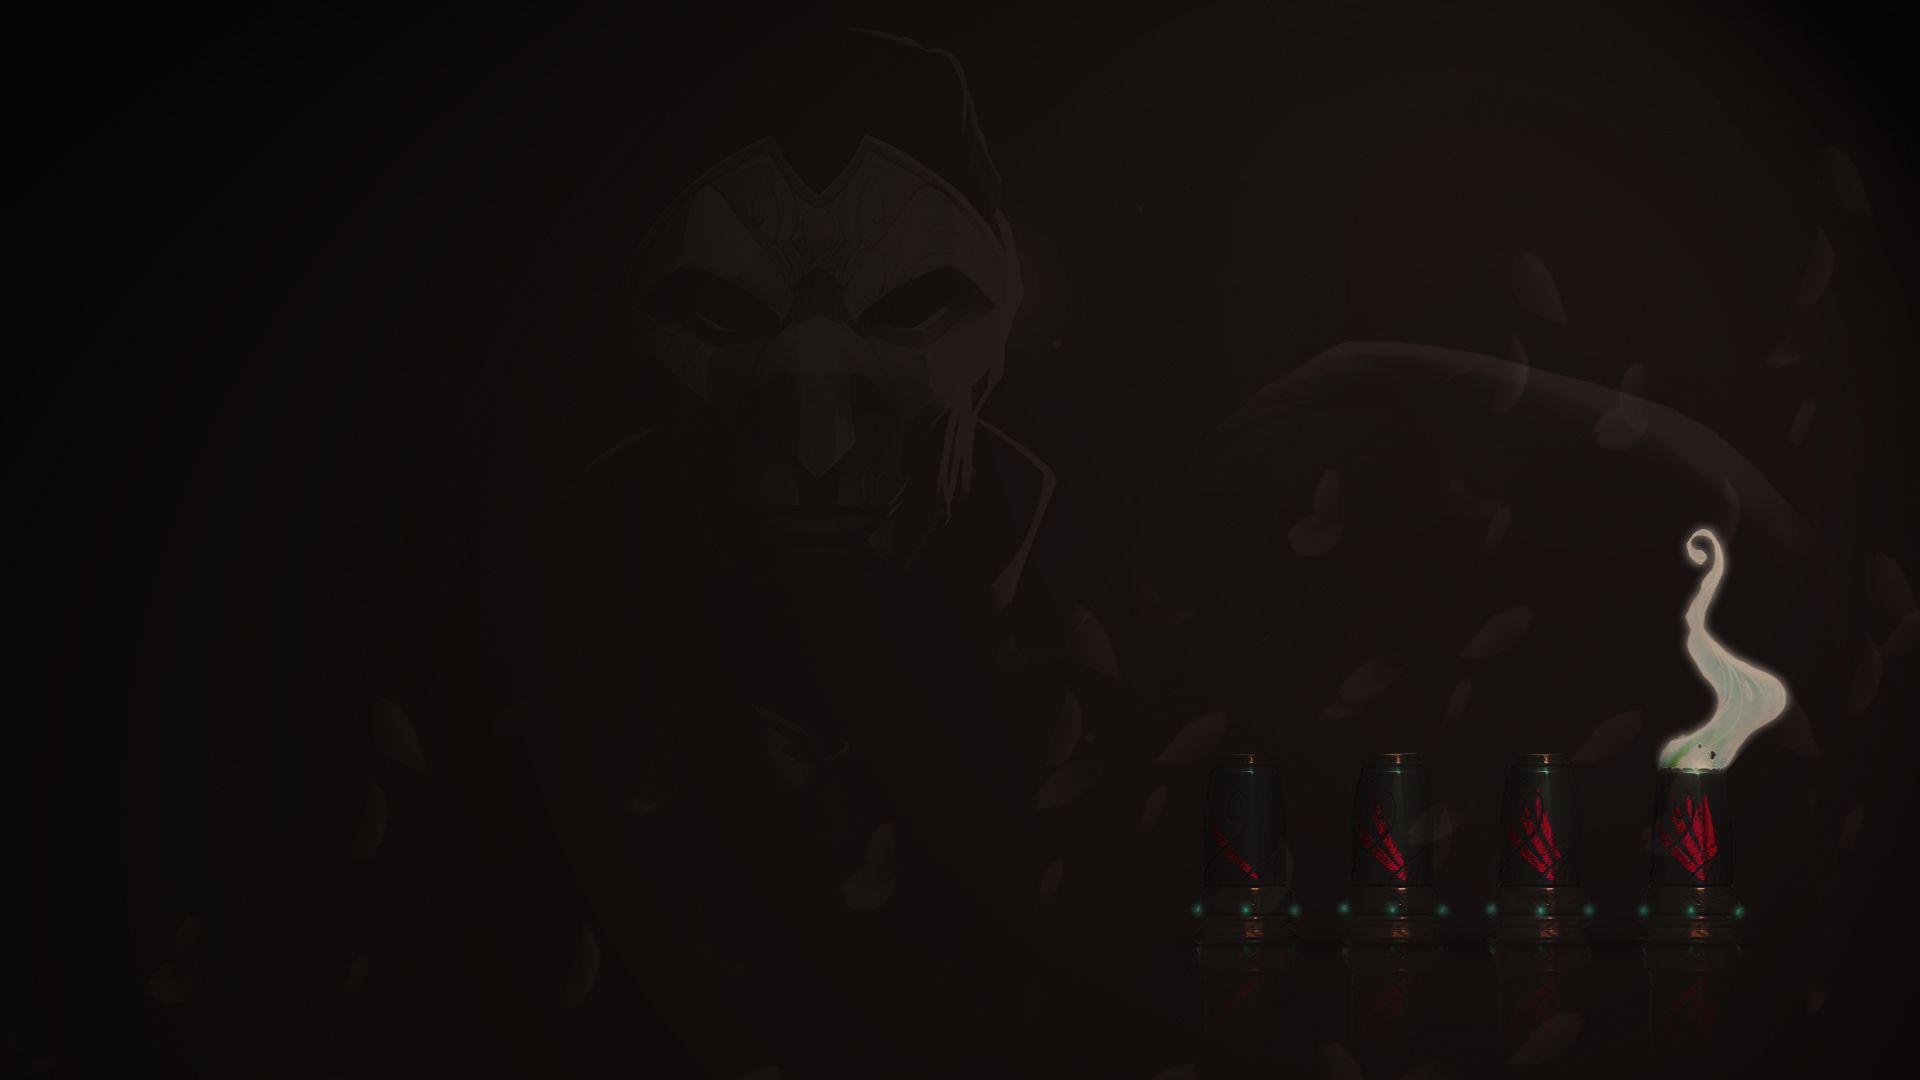 Another New Jhin Wallpaper that I made